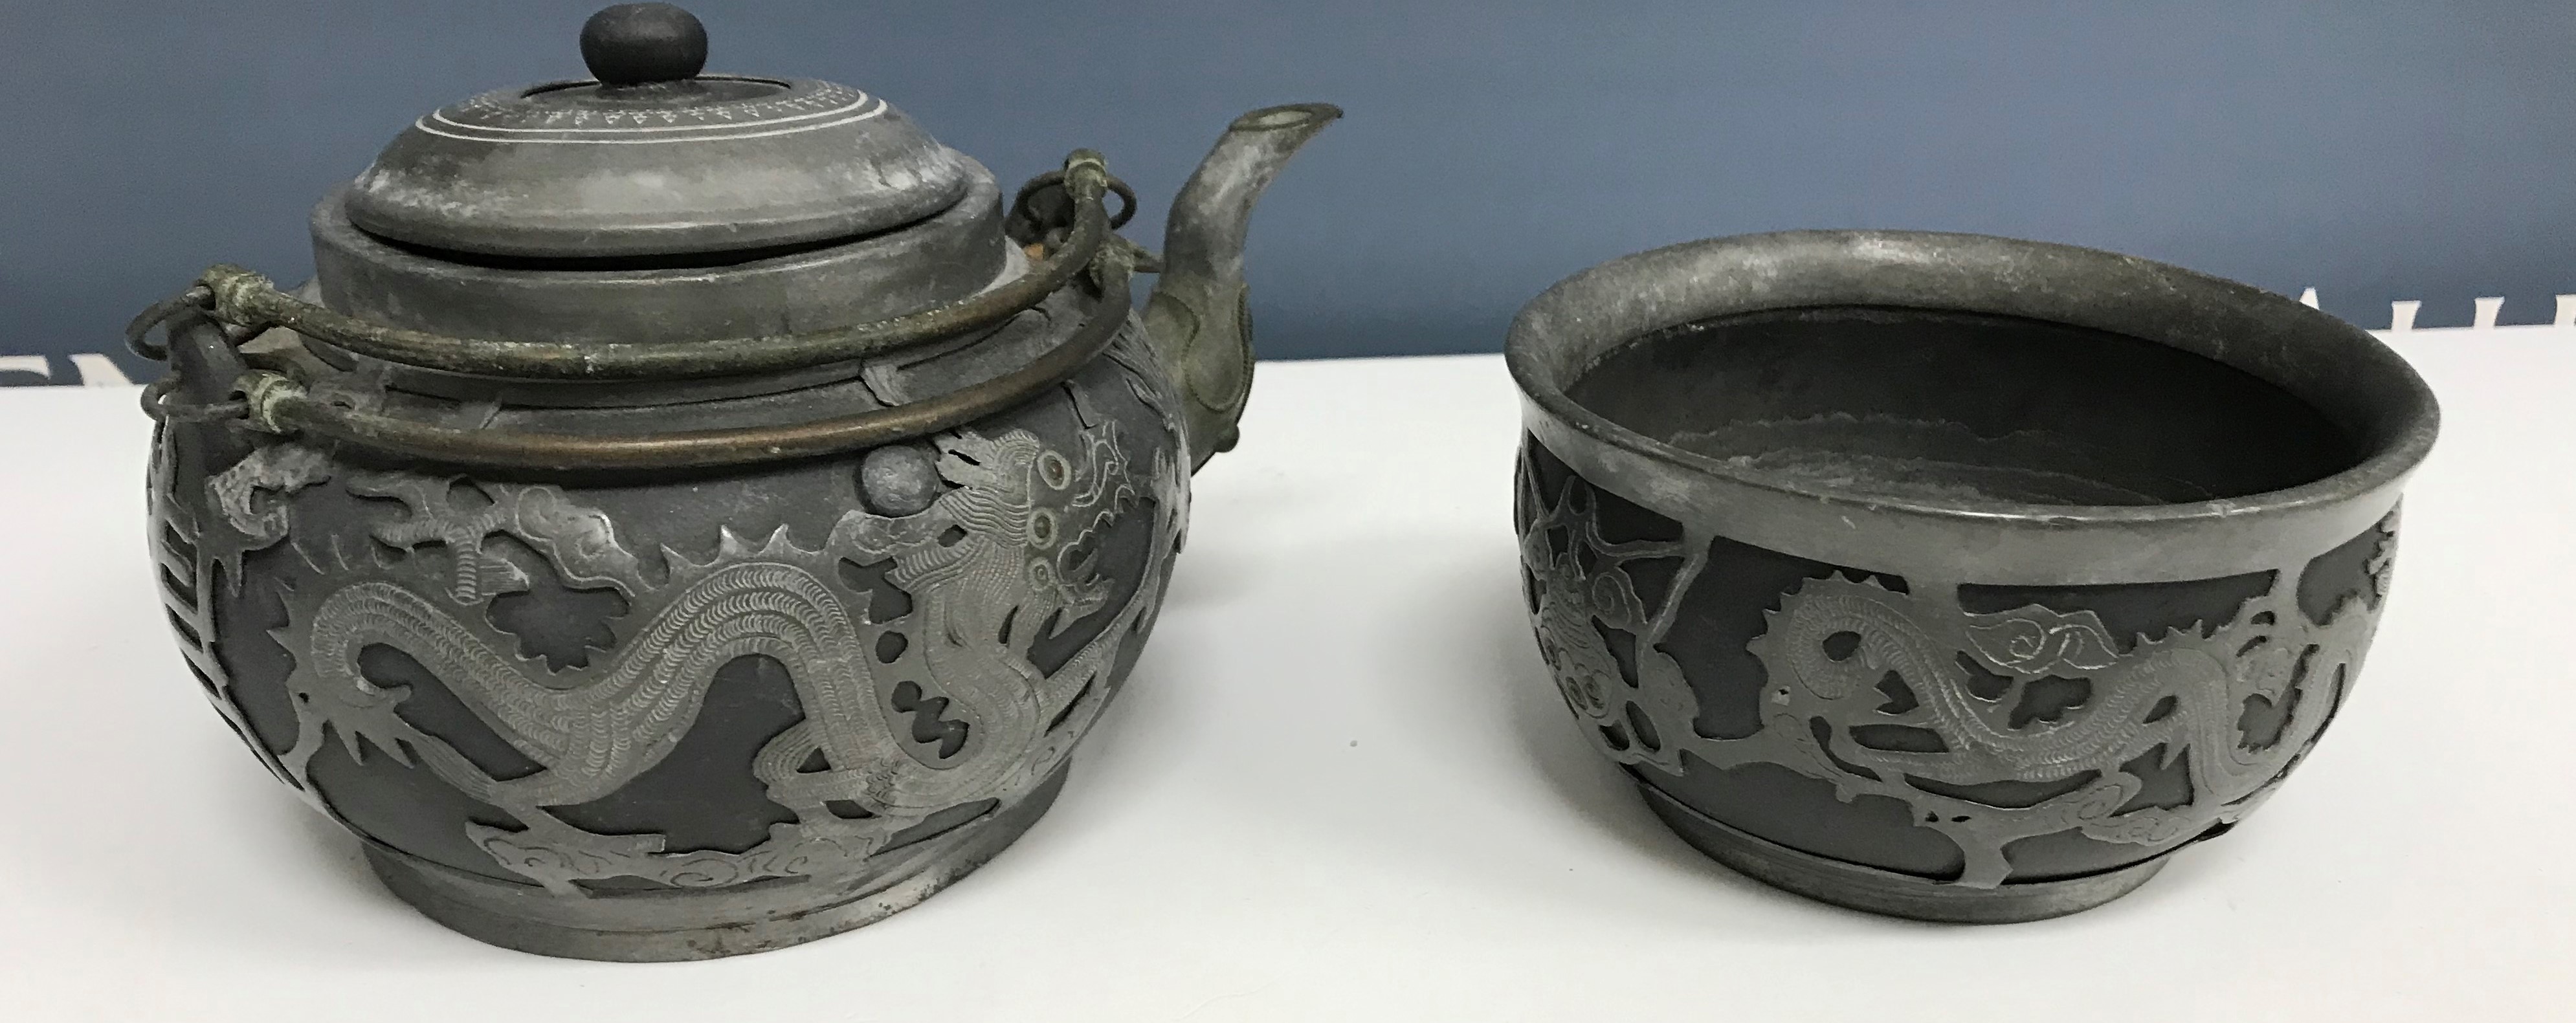 A 20th Century Chinese pewter mounted Yi Xing teapot and bowl,